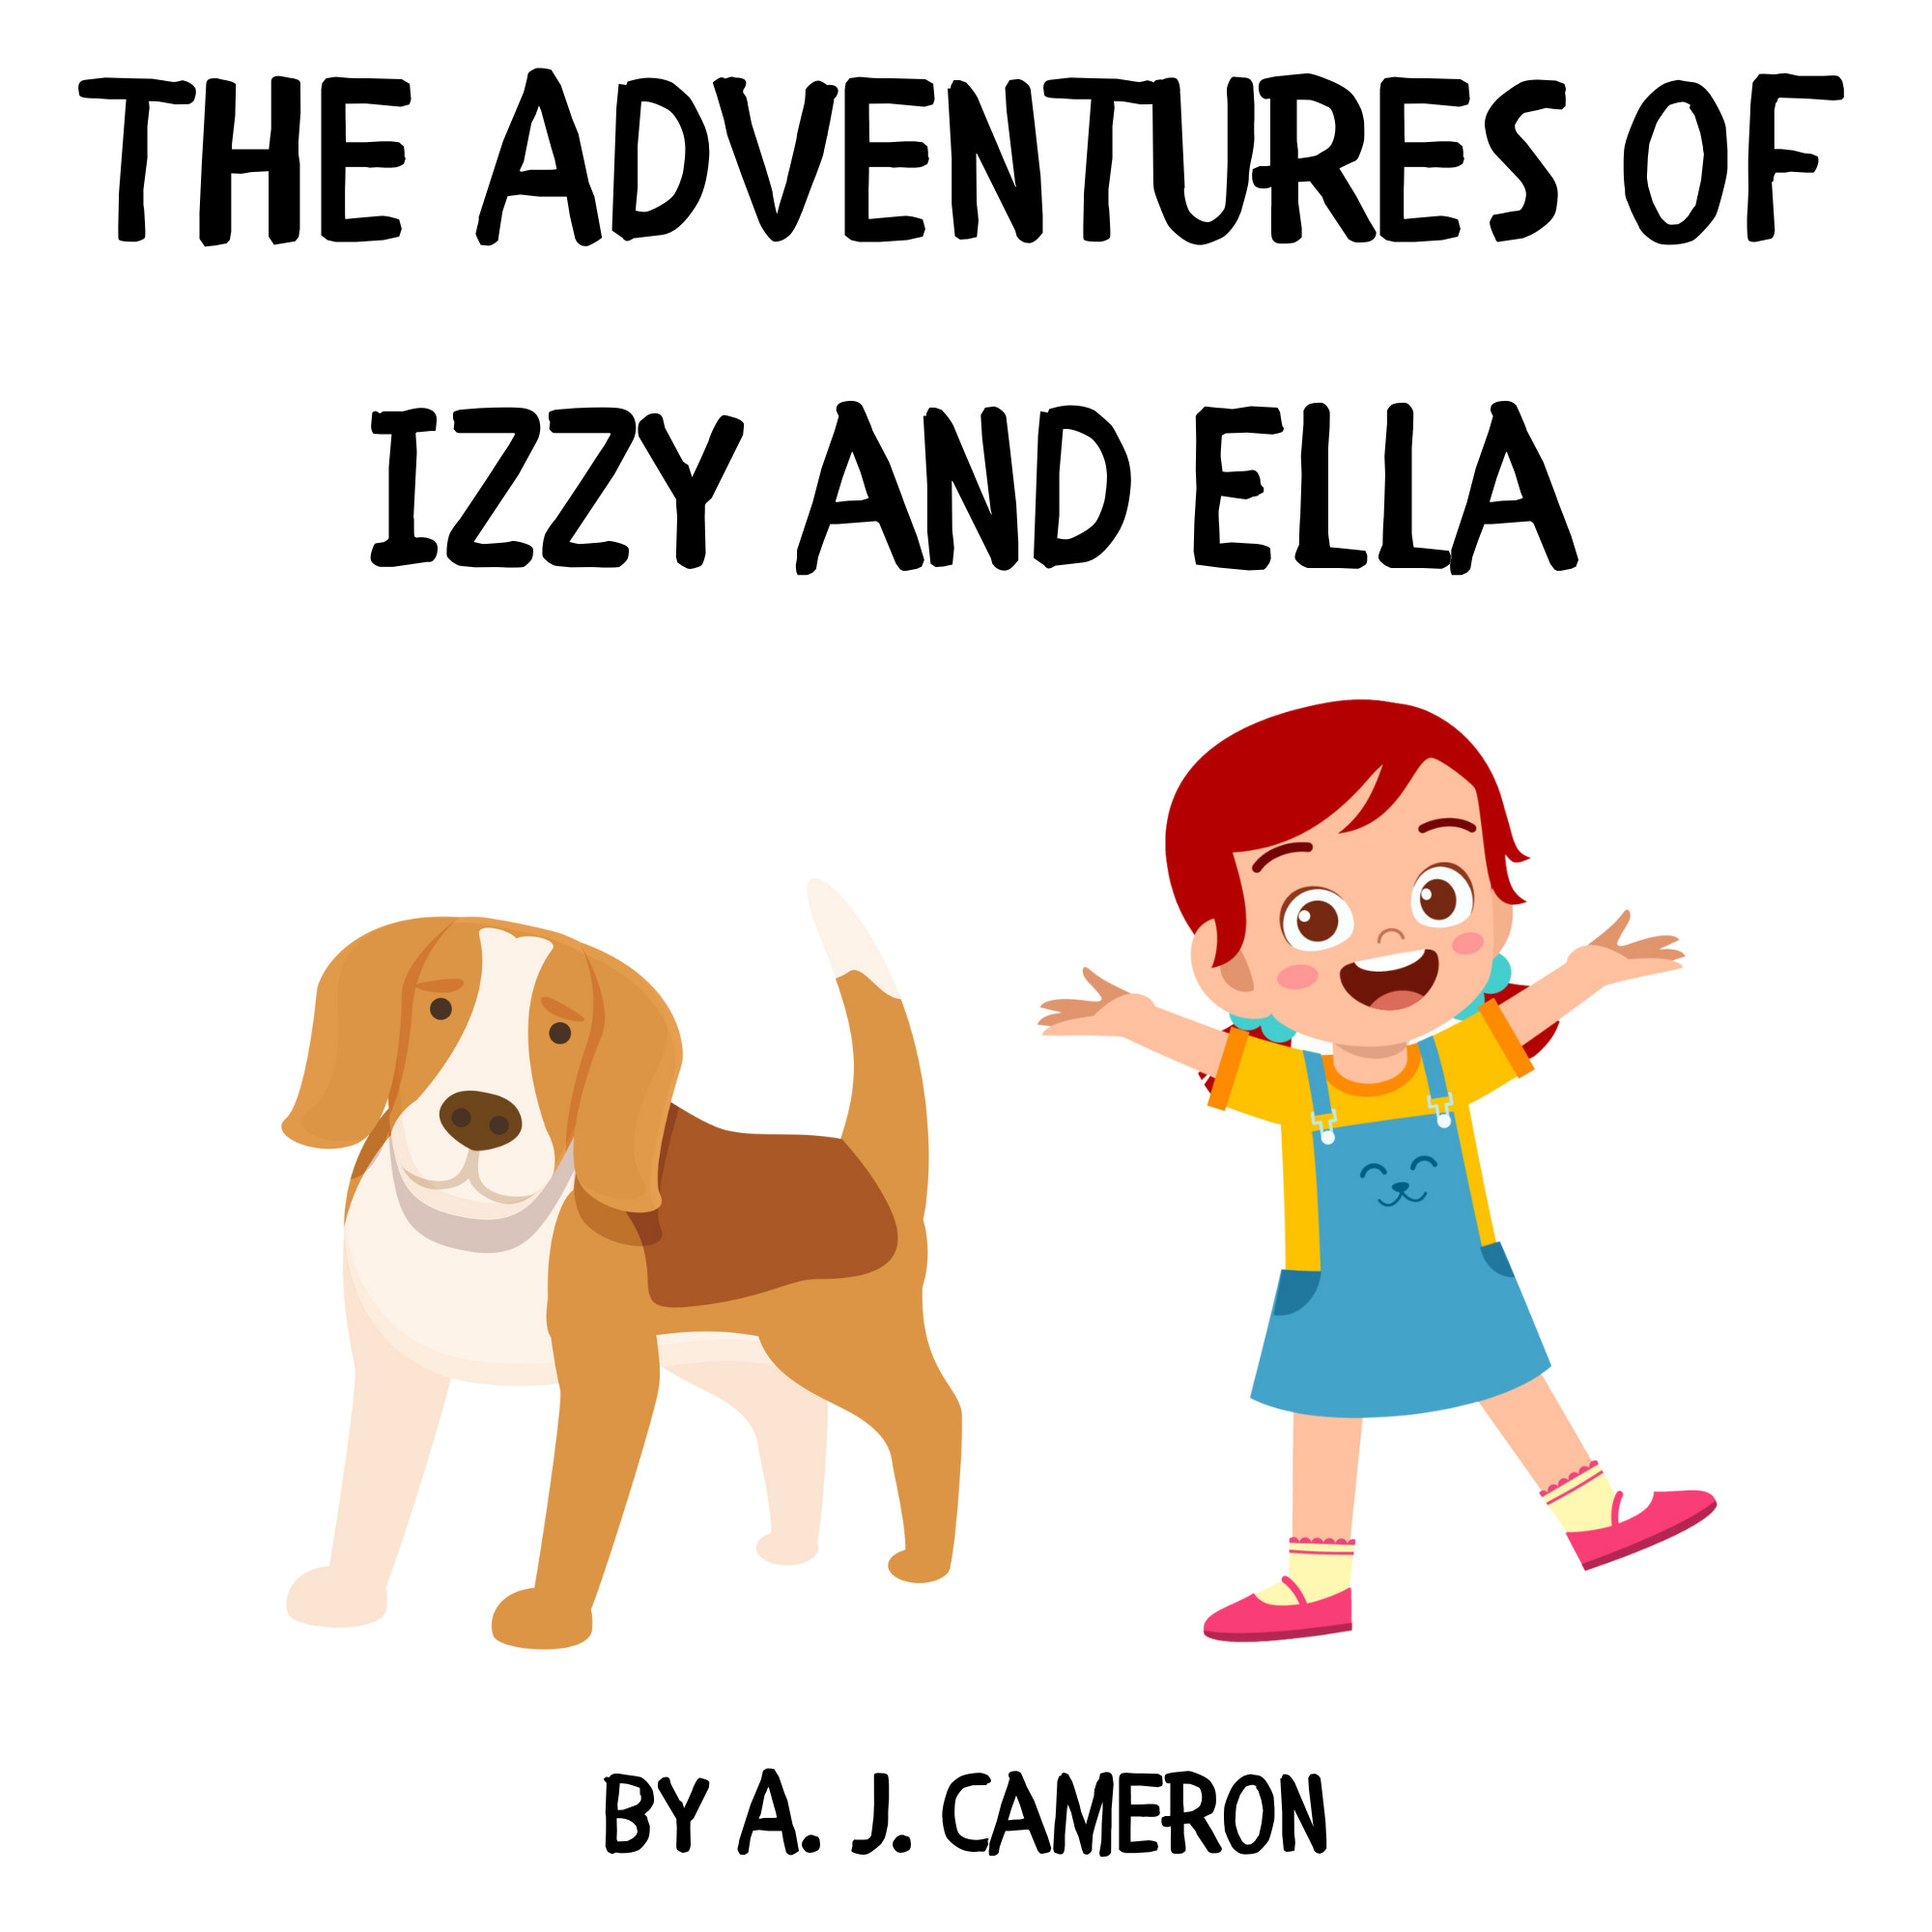 The Adventures of Izzy and Ella